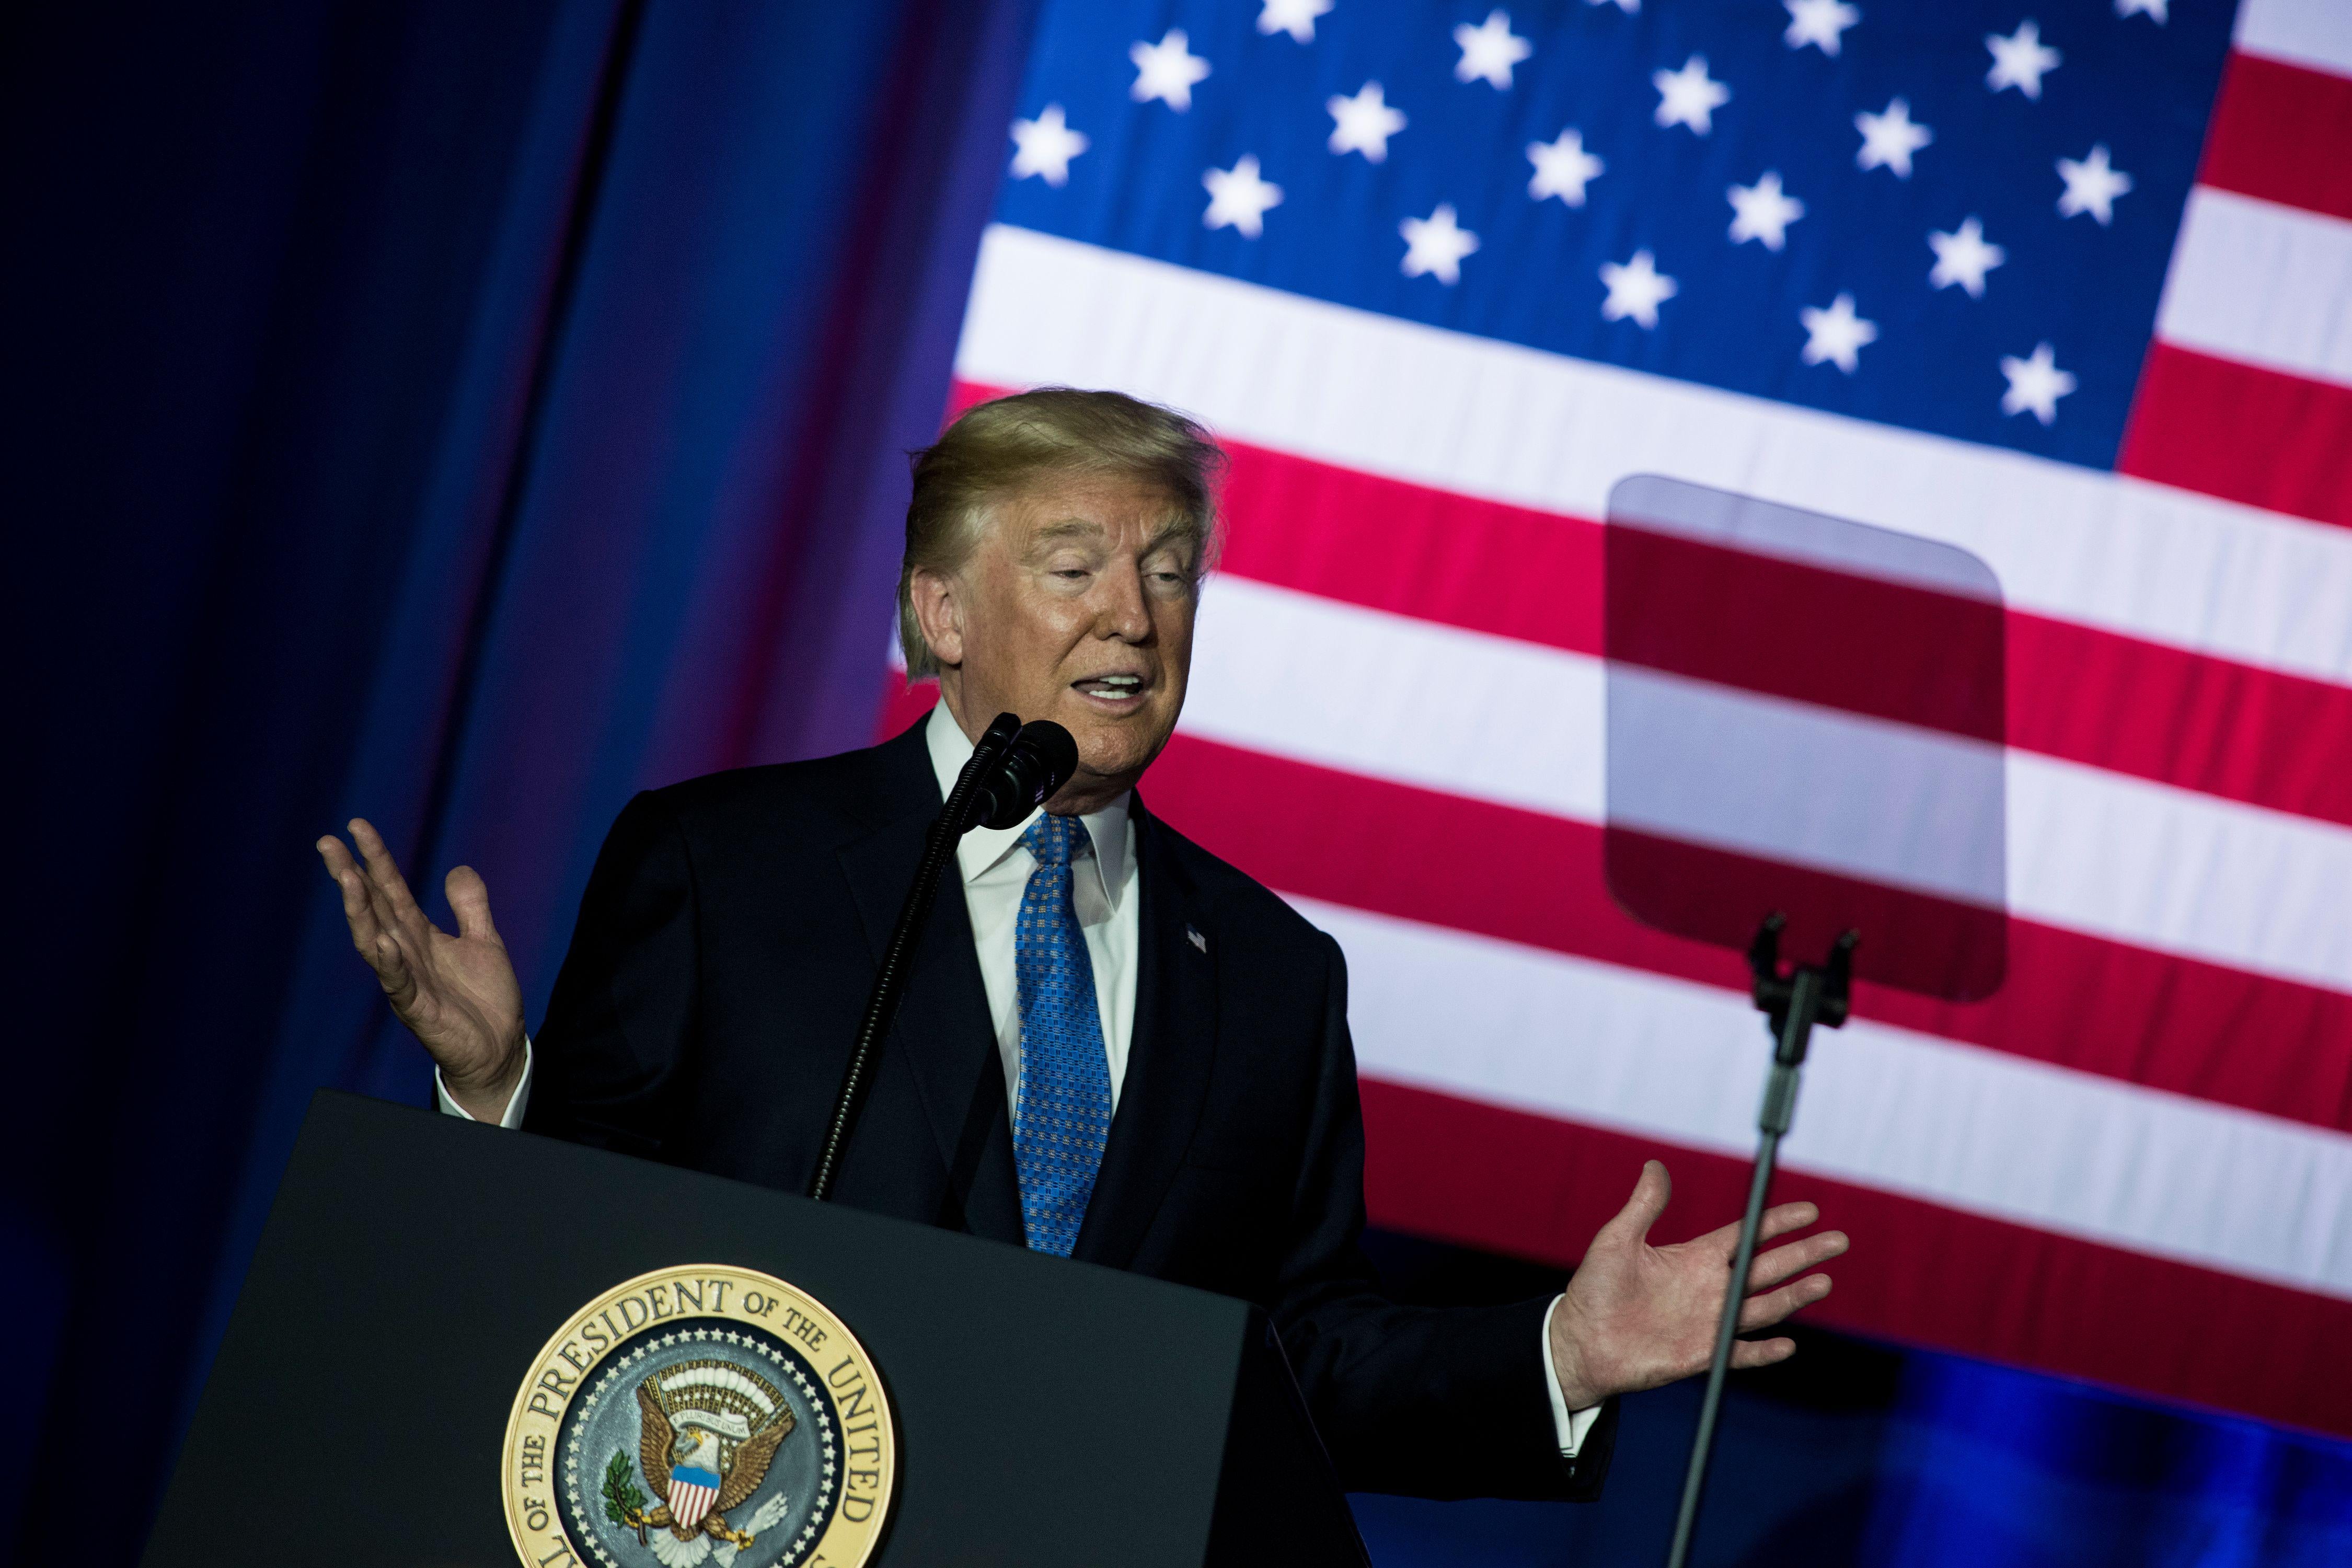 US President Donald Trump speaks about tax reform at the Indiana Farm Bureau building on the Indiana State Fairgrounds September 27, 2017 in Indianapolis, Indiana. / AFP PHOTO / Brendan Smialowski        (Photo credit should read BRENDAN SMIALOWSKI/AFP/Getty Images)